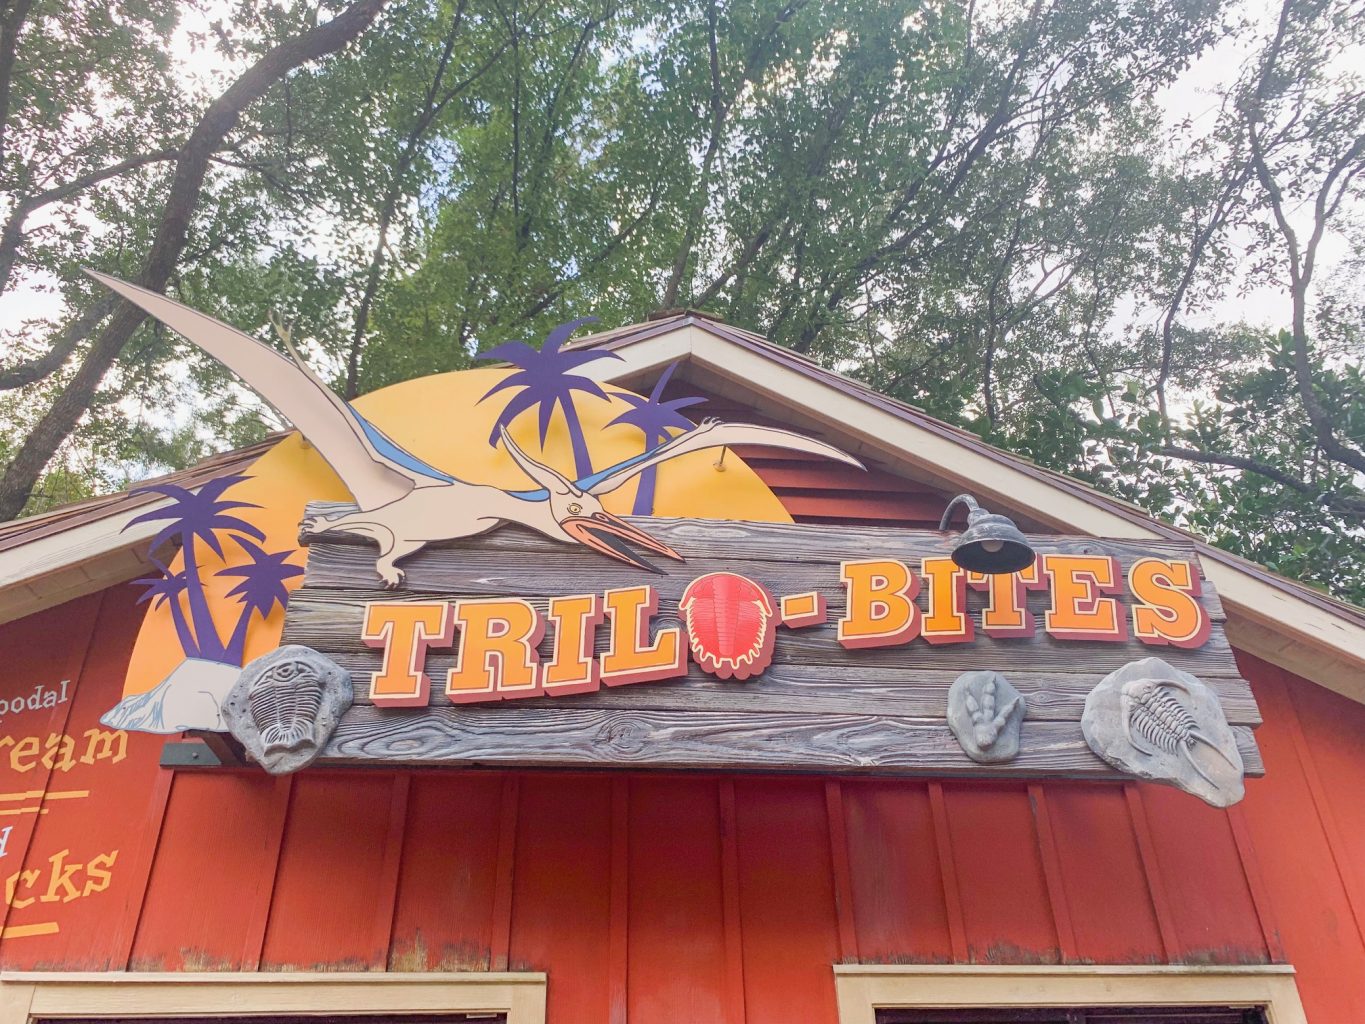 The trilo-bites sign features pterodactyl, which is cute and shows how family friendly this place is: it is one of the best Animal Kingdom restaurants around. 